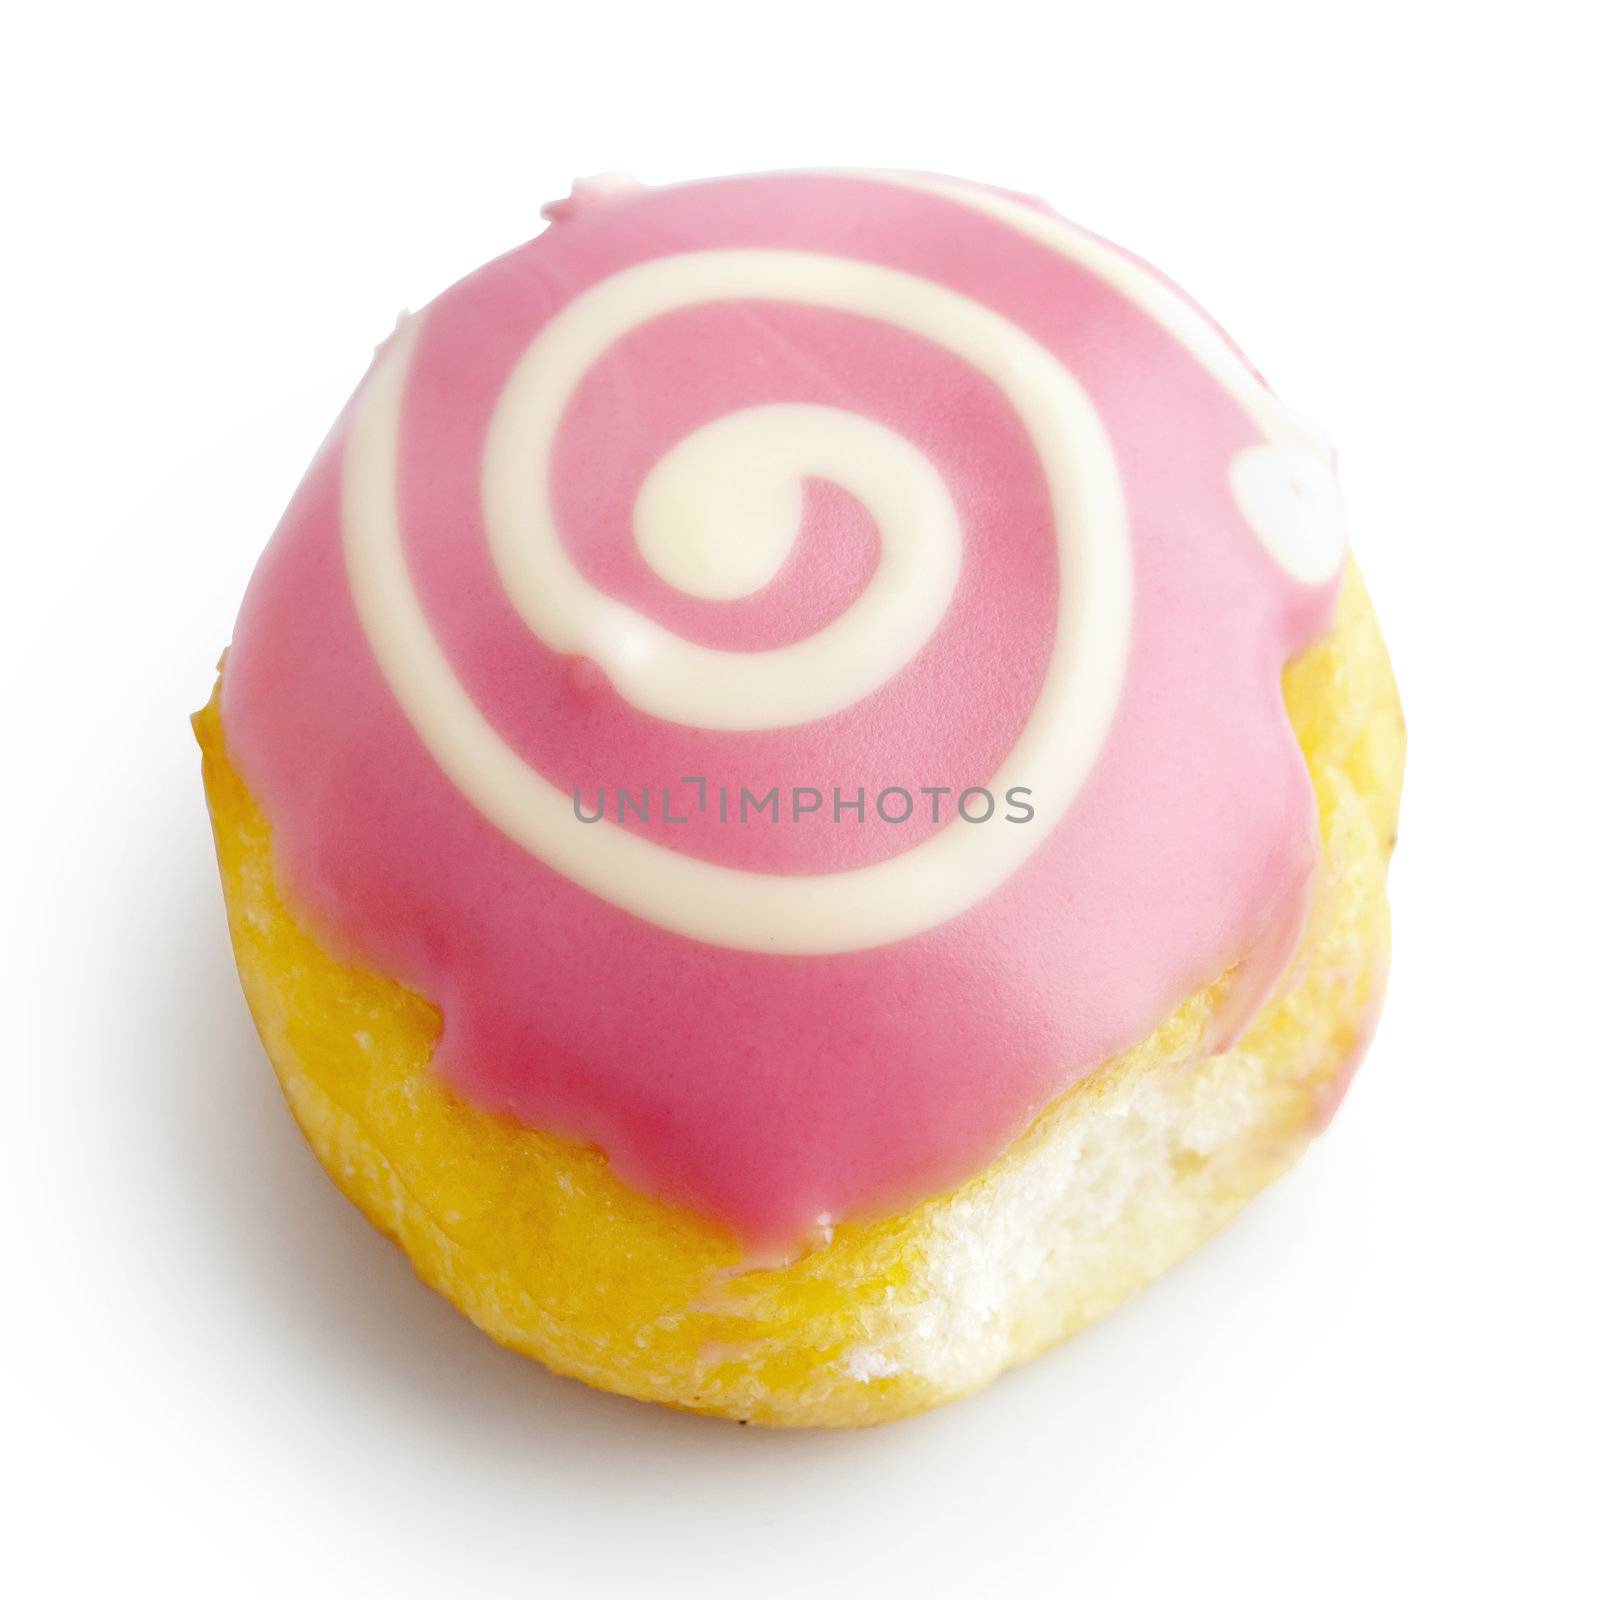 Pink iced baby donut on white background